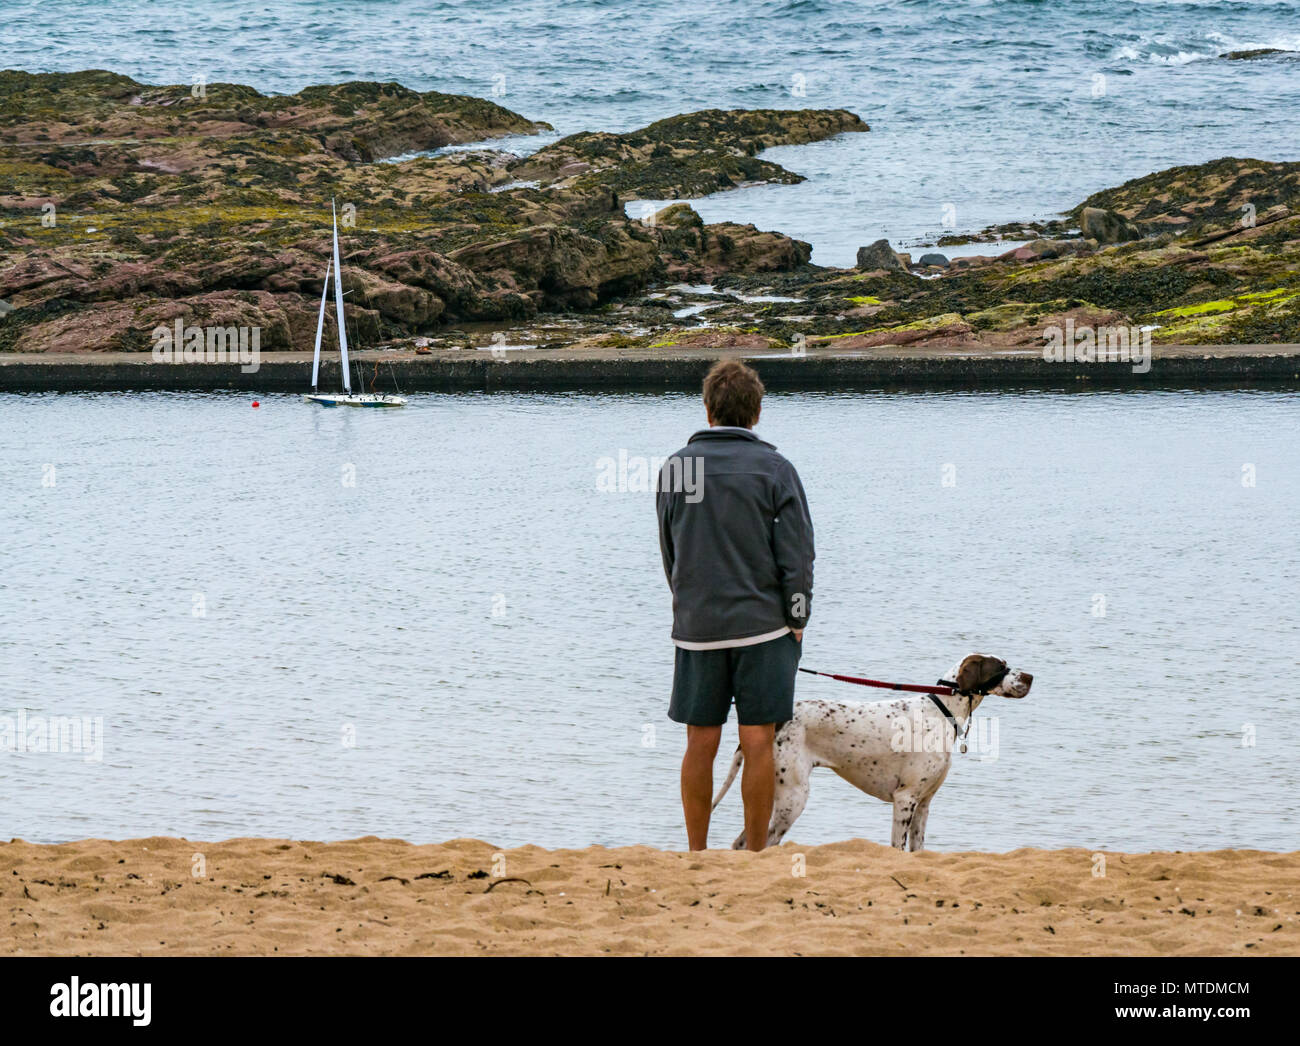 Milsey Bay, North Berwick. East Lothian, Scotland, United Kingdom, 30th May 2018. A radio controlled Kyosho Marine Racing sailing yacht in the tidal bathing pool. A man walking a Pointer dog watches the model boat Stock Photo